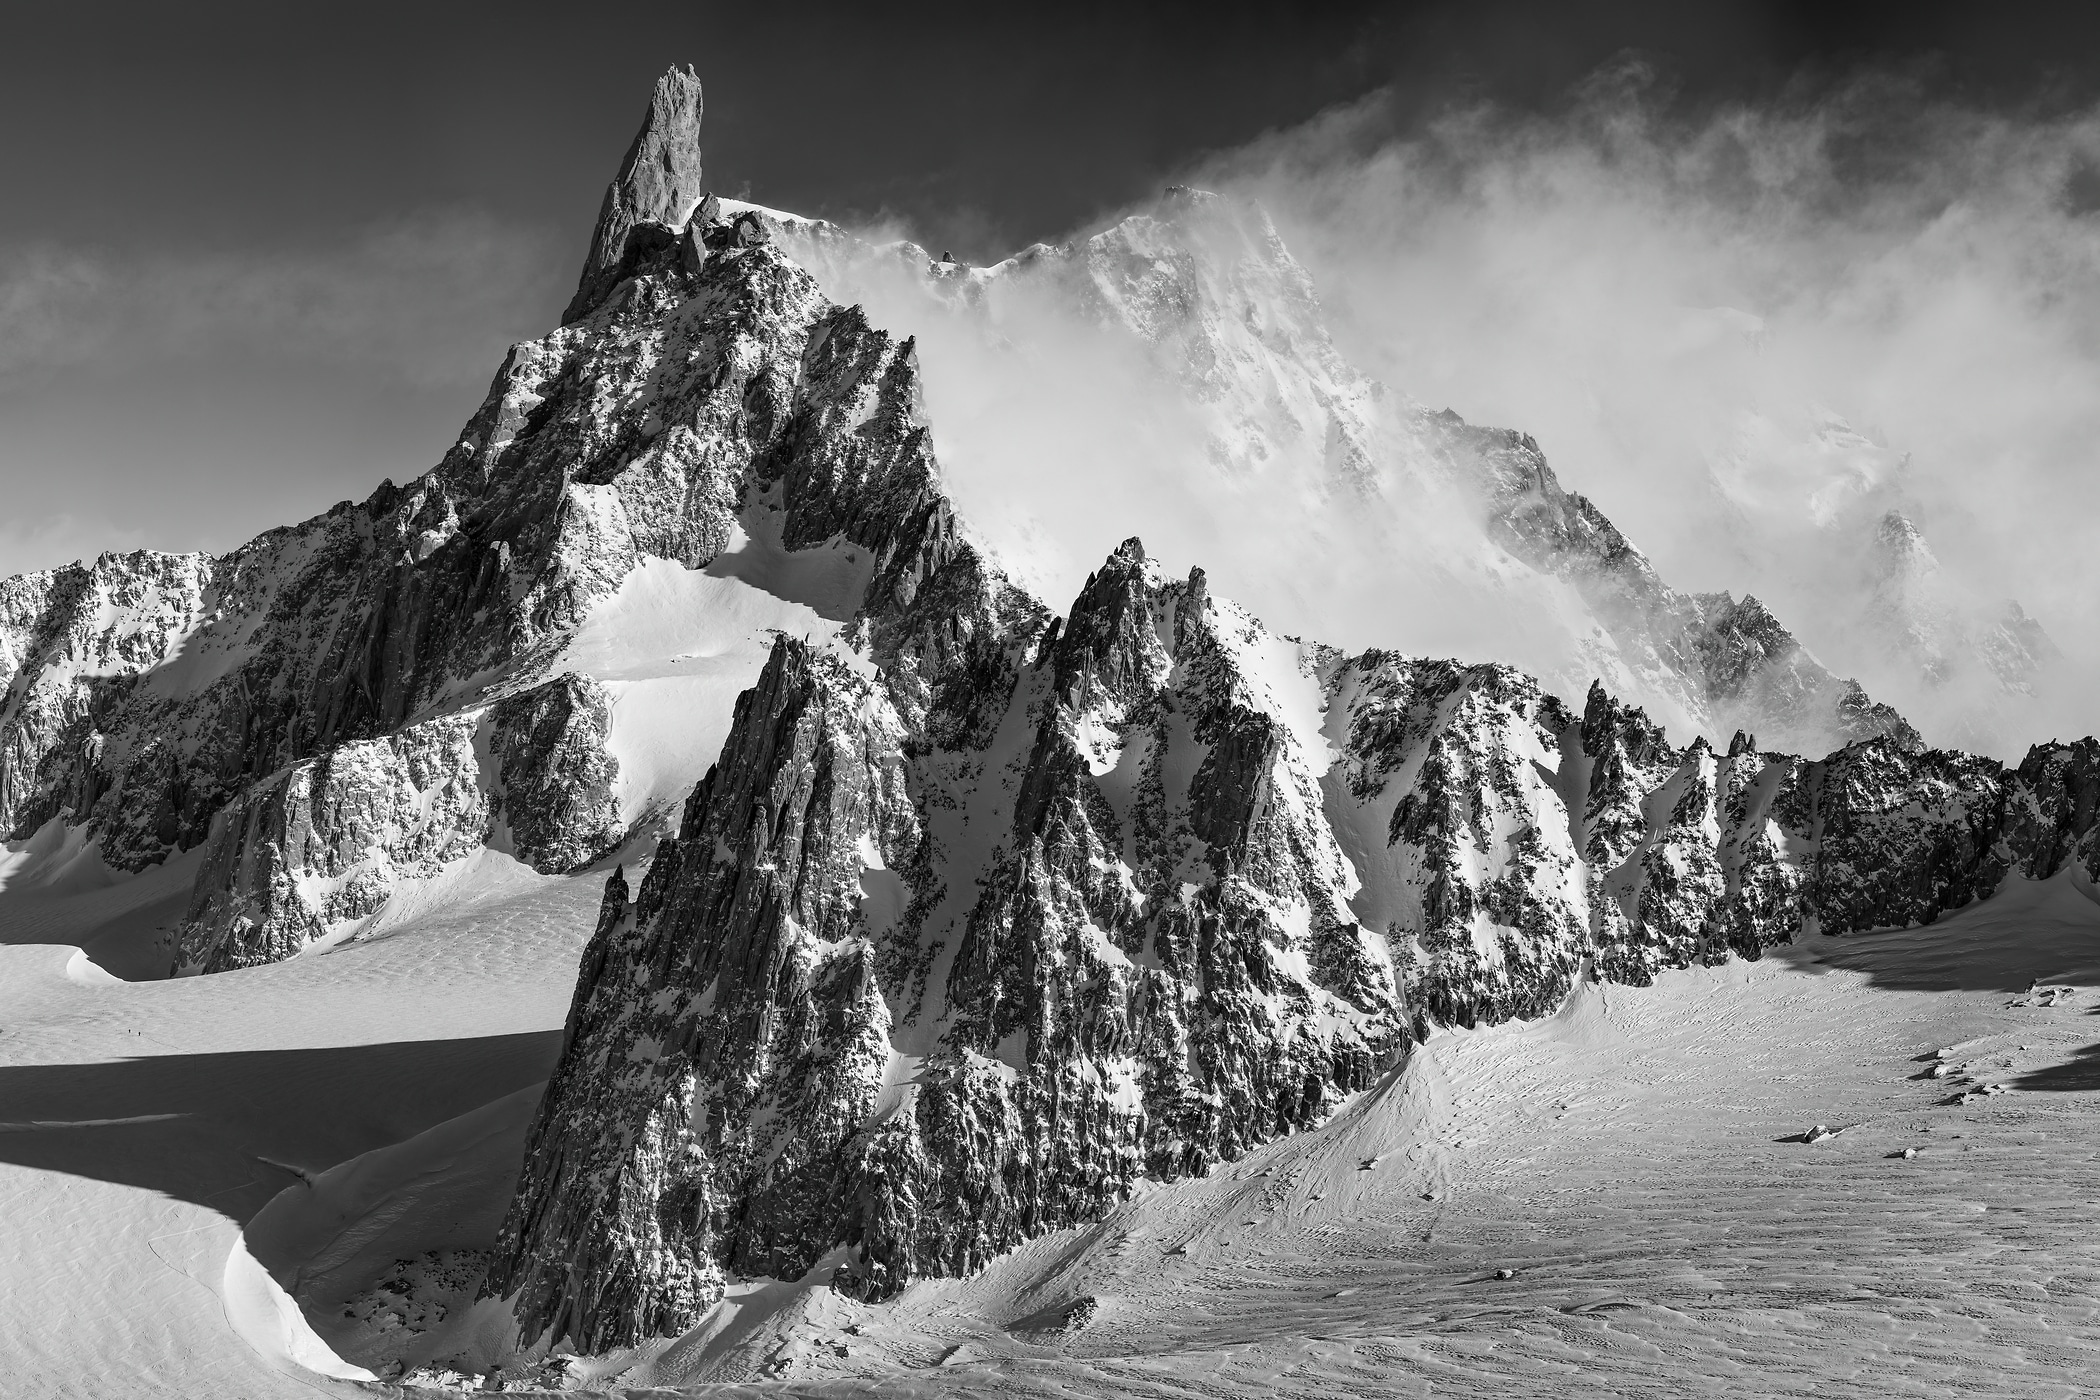 1,696 megapixels! A very high resolution, large-format fine art photograph of a mountain in the Alps; landscape photograph created by Duilio Fiorille of La Dent du Géant of the Rochefort ridge in Punta Helbronner, Courmayeur, Italy.